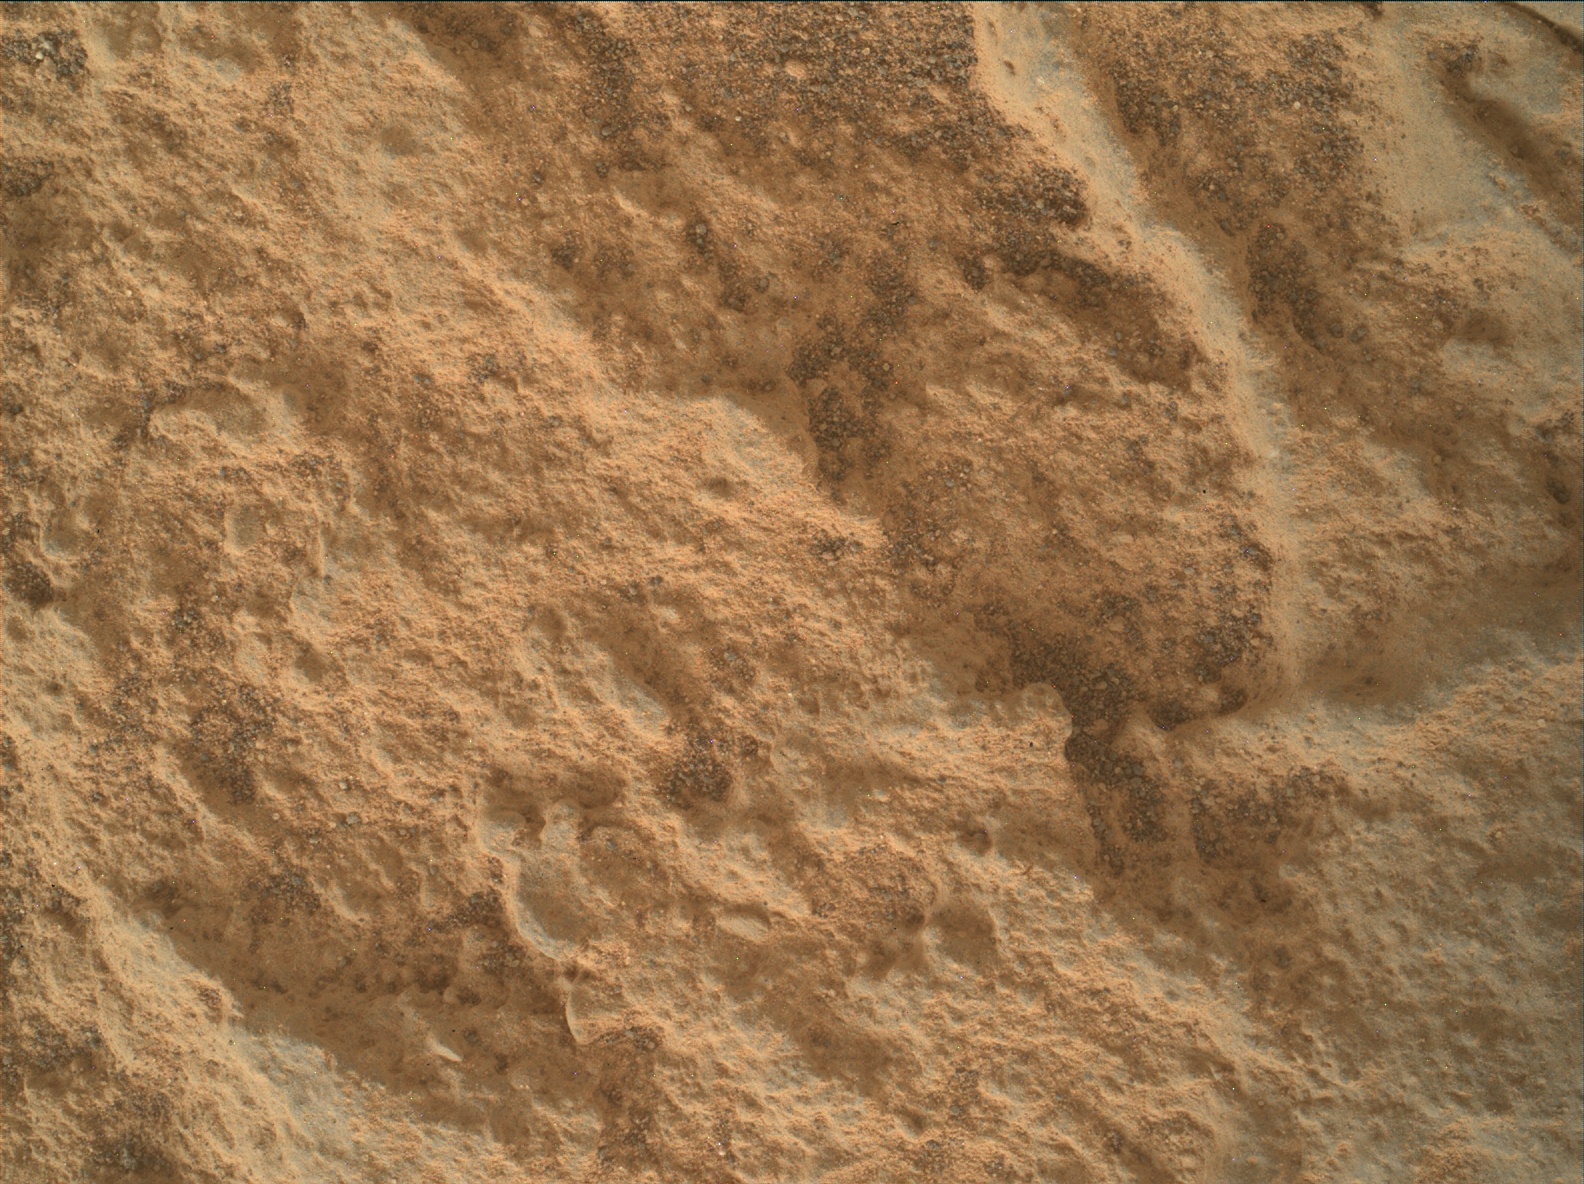 Nasa's Mars rover Curiosity acquired this image using its Mars Hand Lens Imager (MAHLI) on Sol 3440